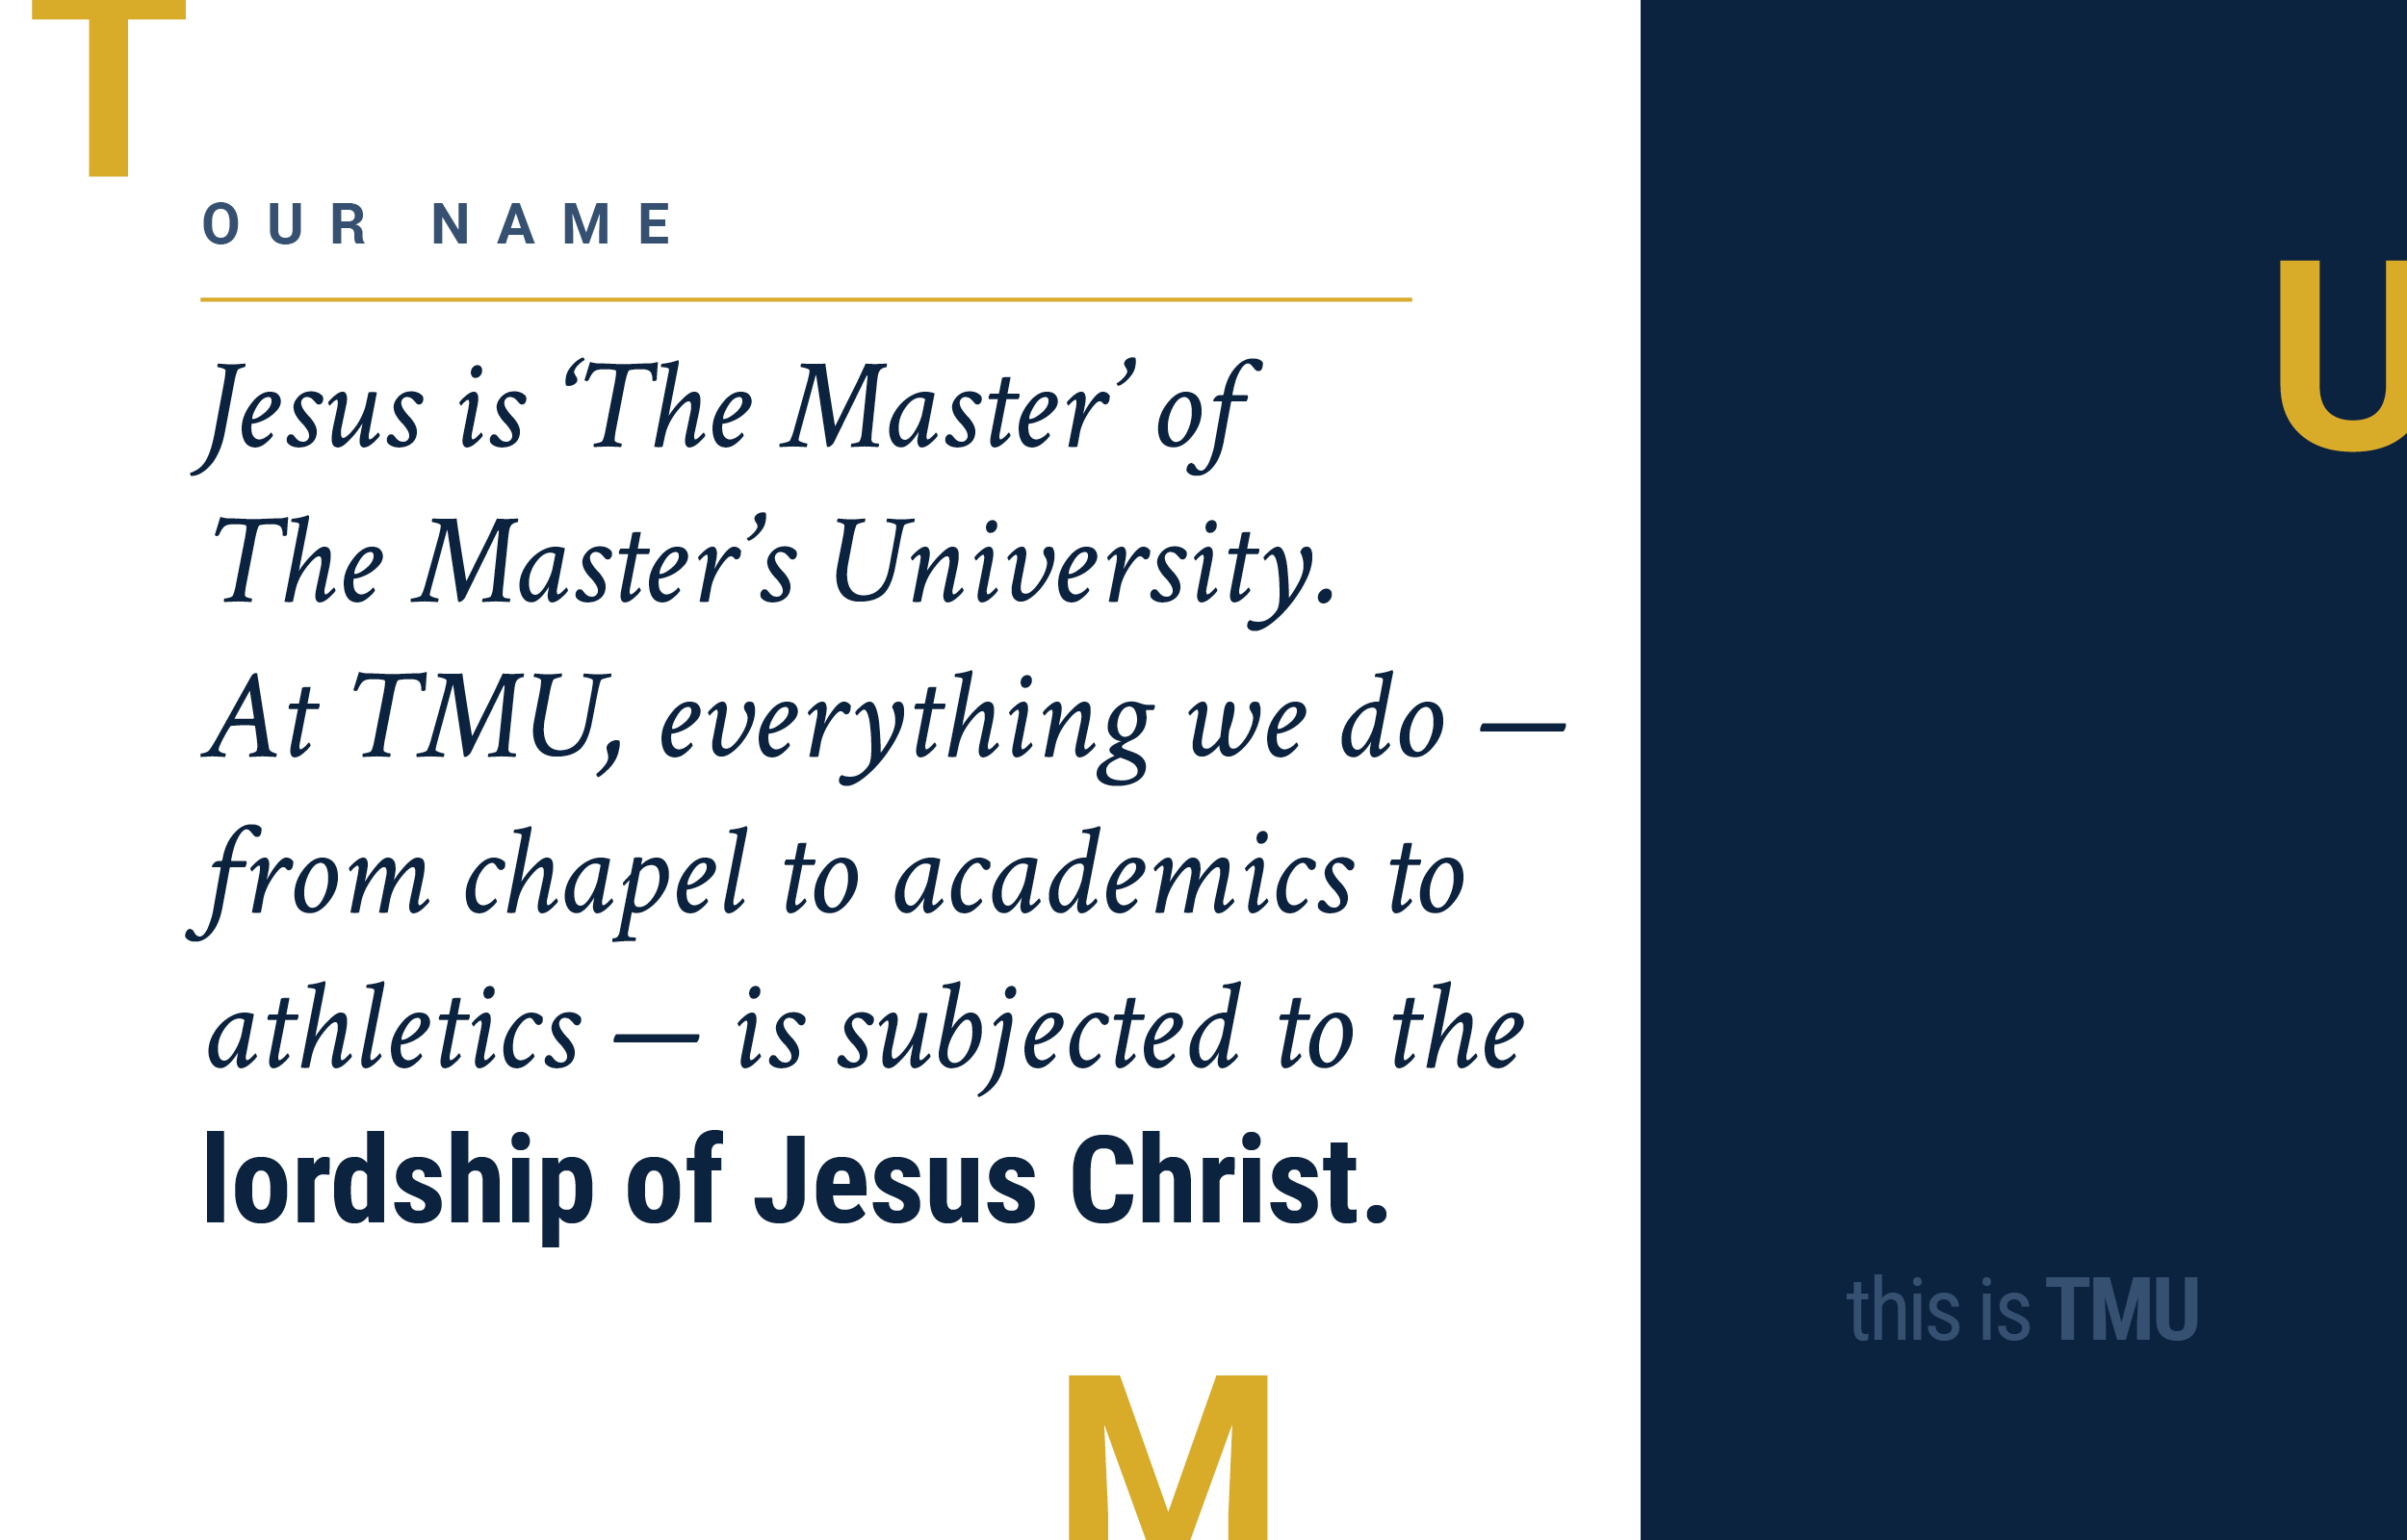 This is TMU: Our Name image